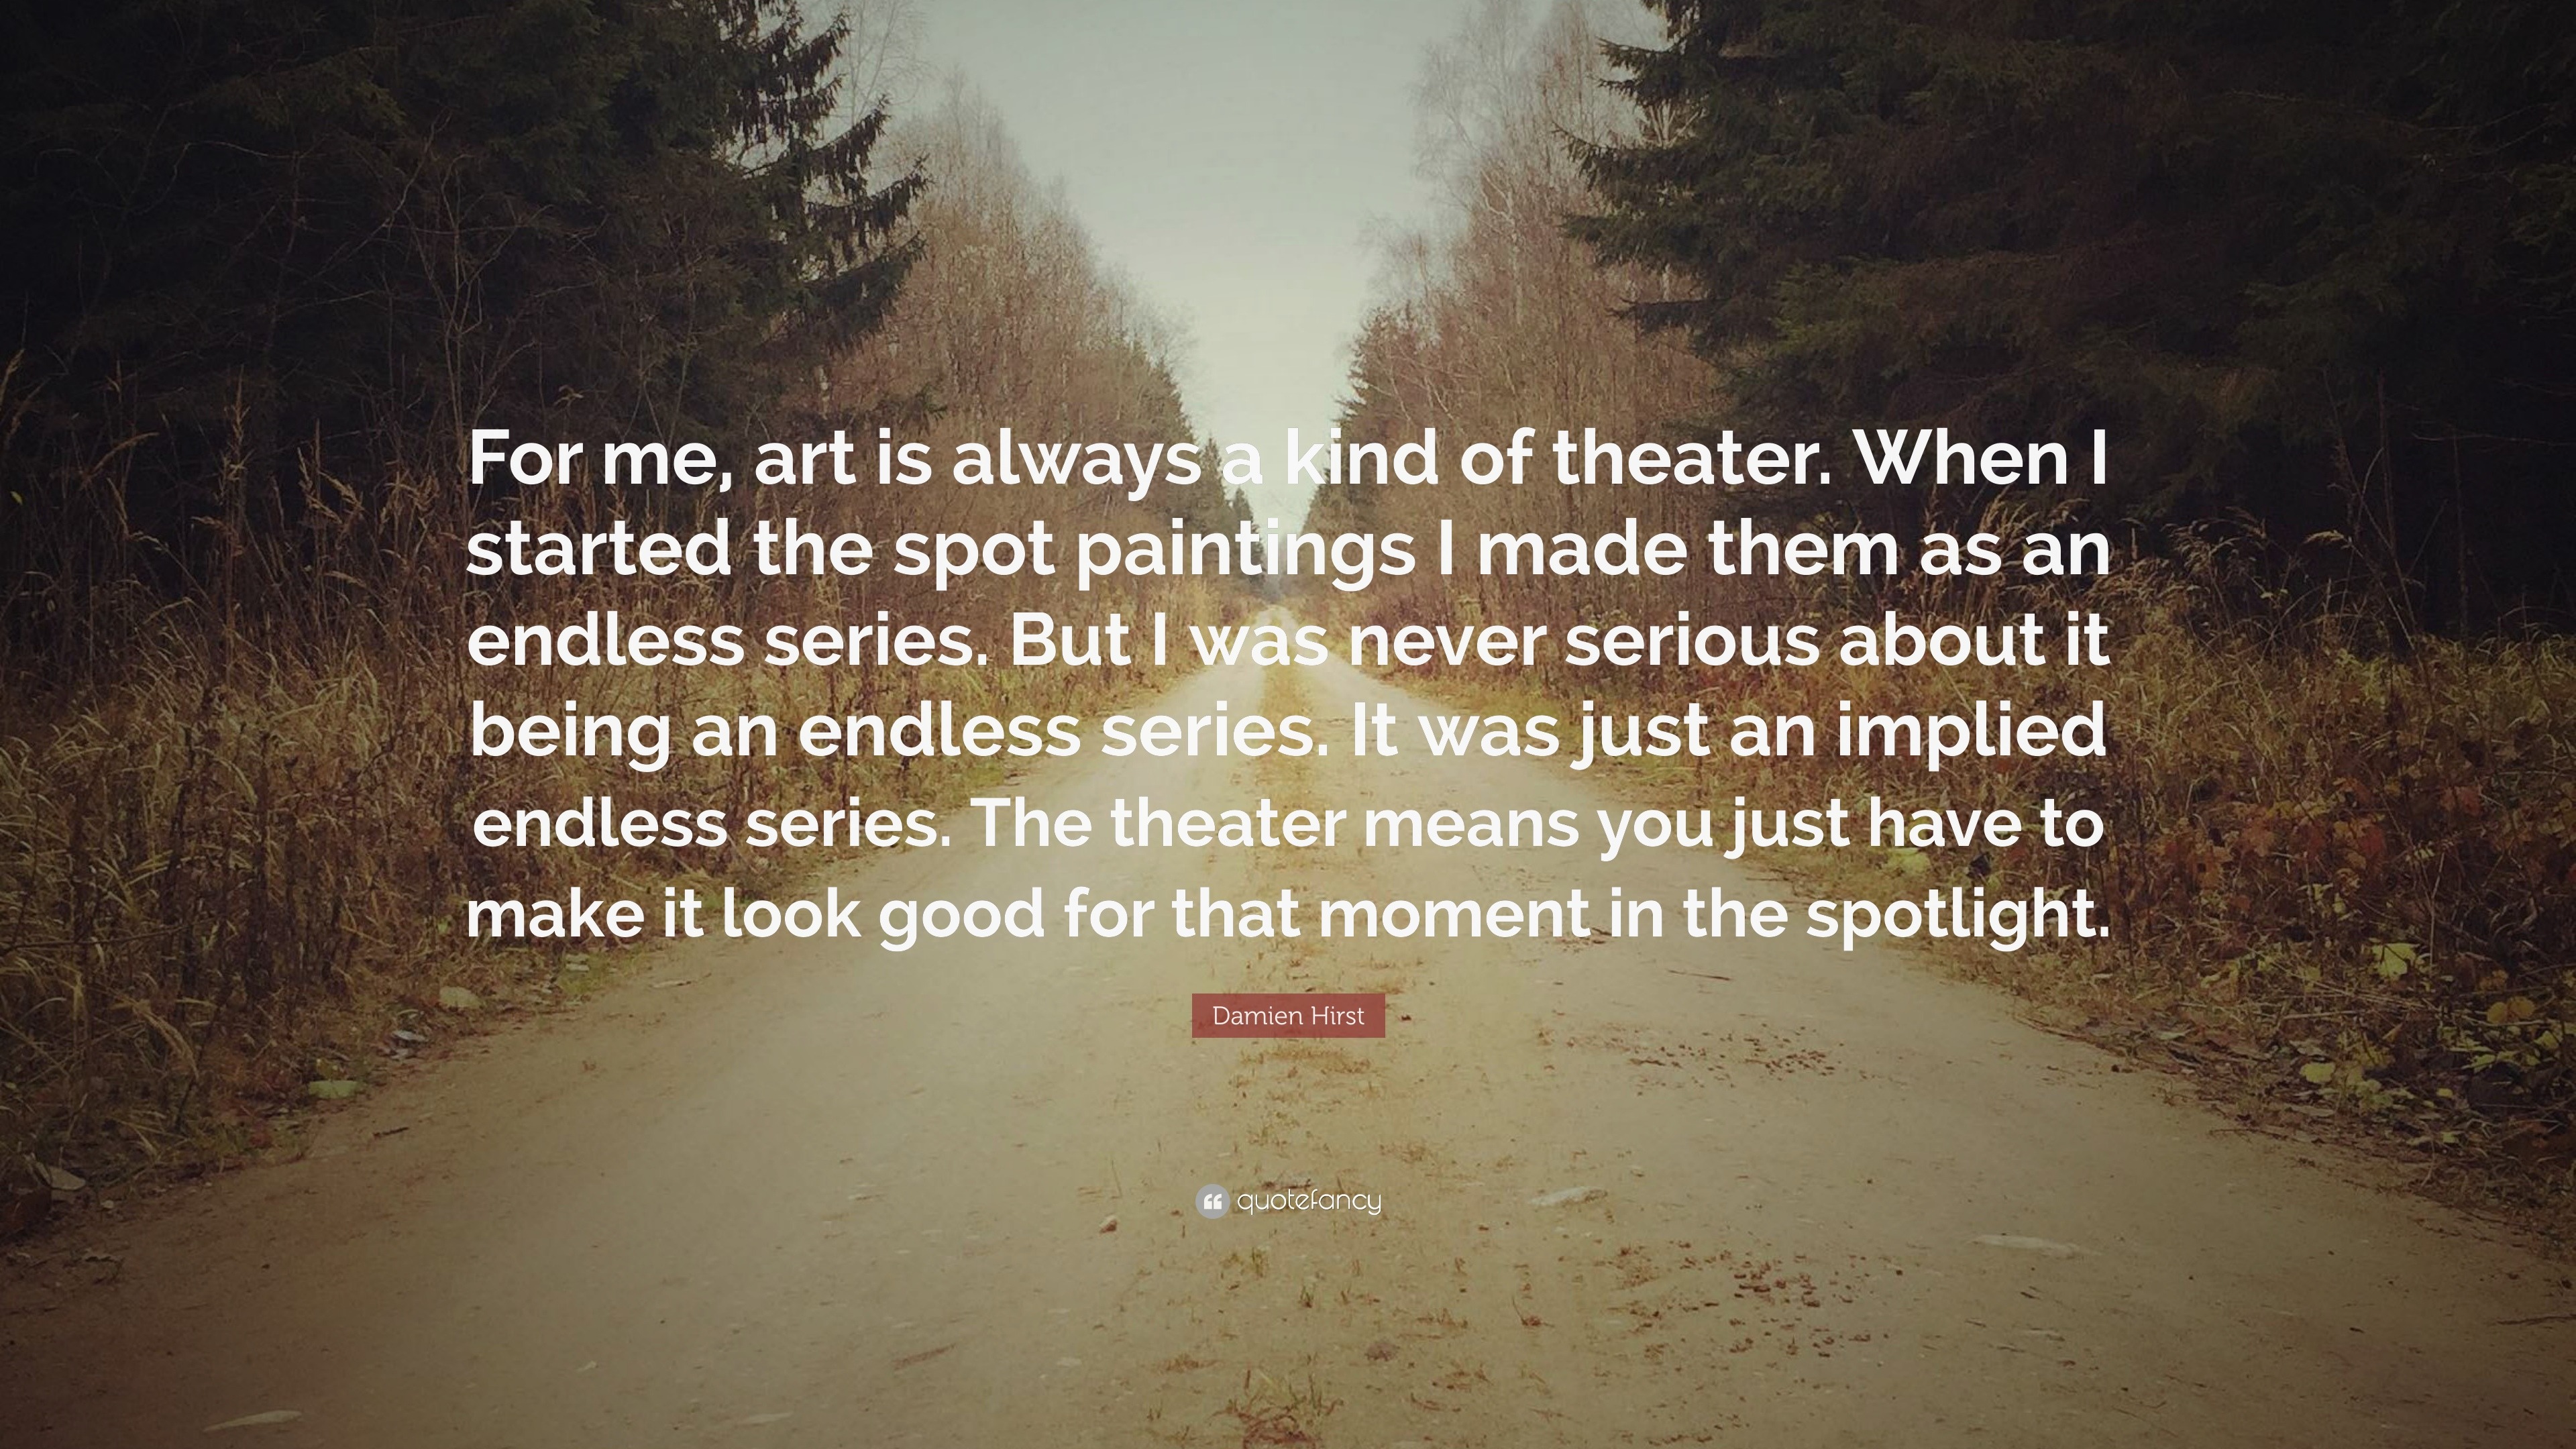 Damien Hirst Quote: “For me, art is always a kind of theater. When I ...